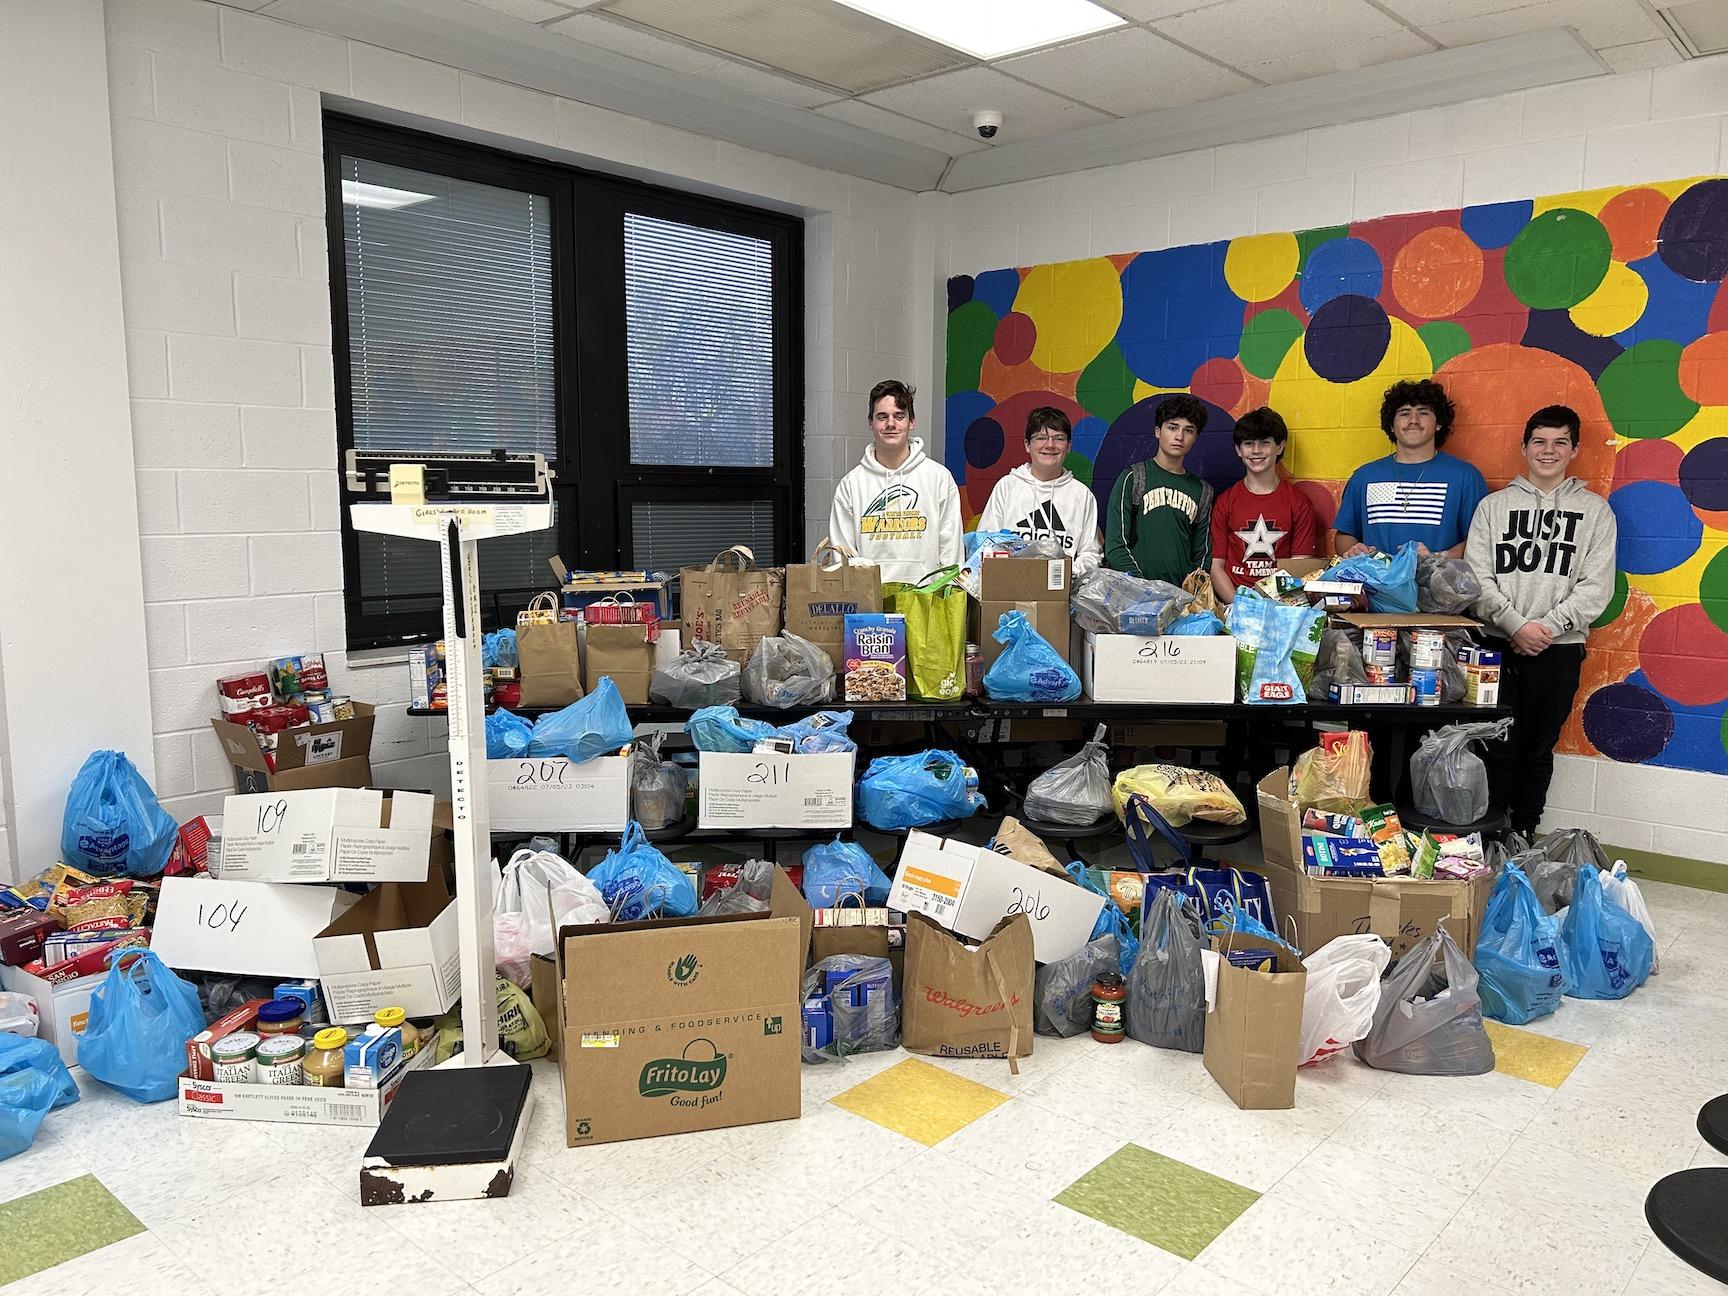 Officers of the Penn Middle School Student Government weighed all the food donations:  (left to right) Nate Casey, Grady Swartz, Daniel Lisbon, Andrew Hauck, Tanner DeStefano, Braden Dynys